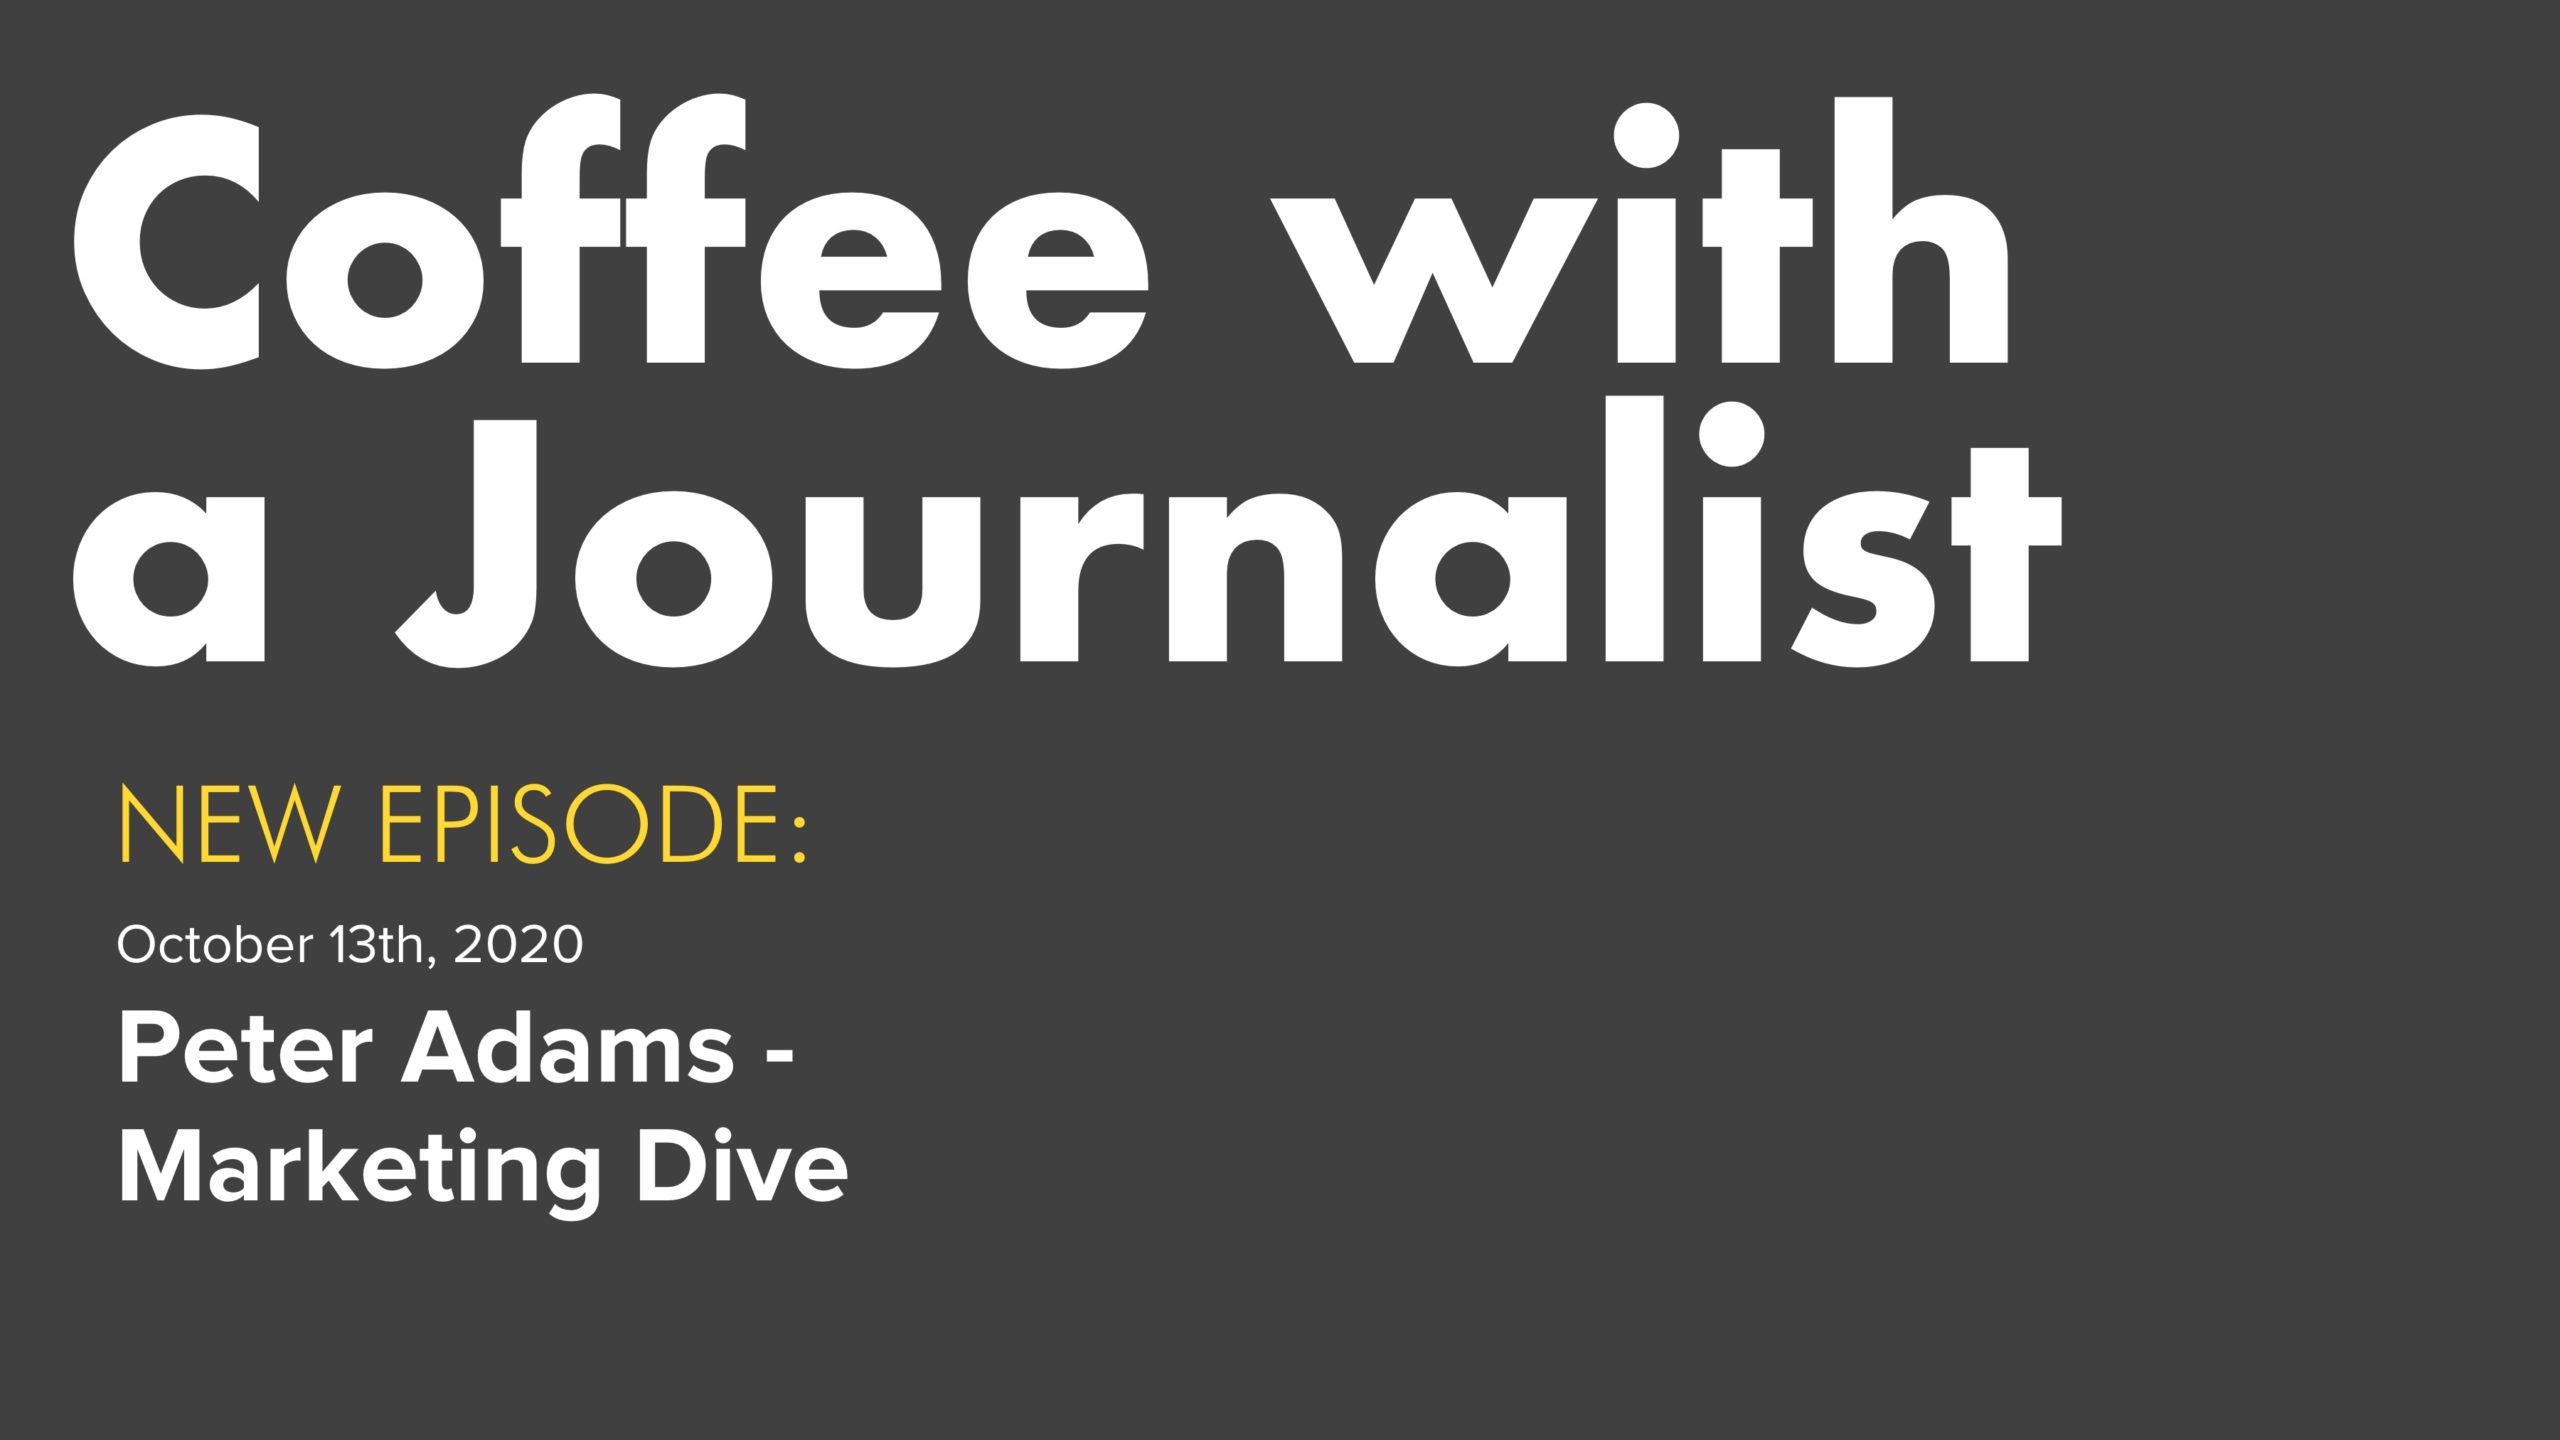 Coffee with a Journalist: Peter Adams, Marketing Dive